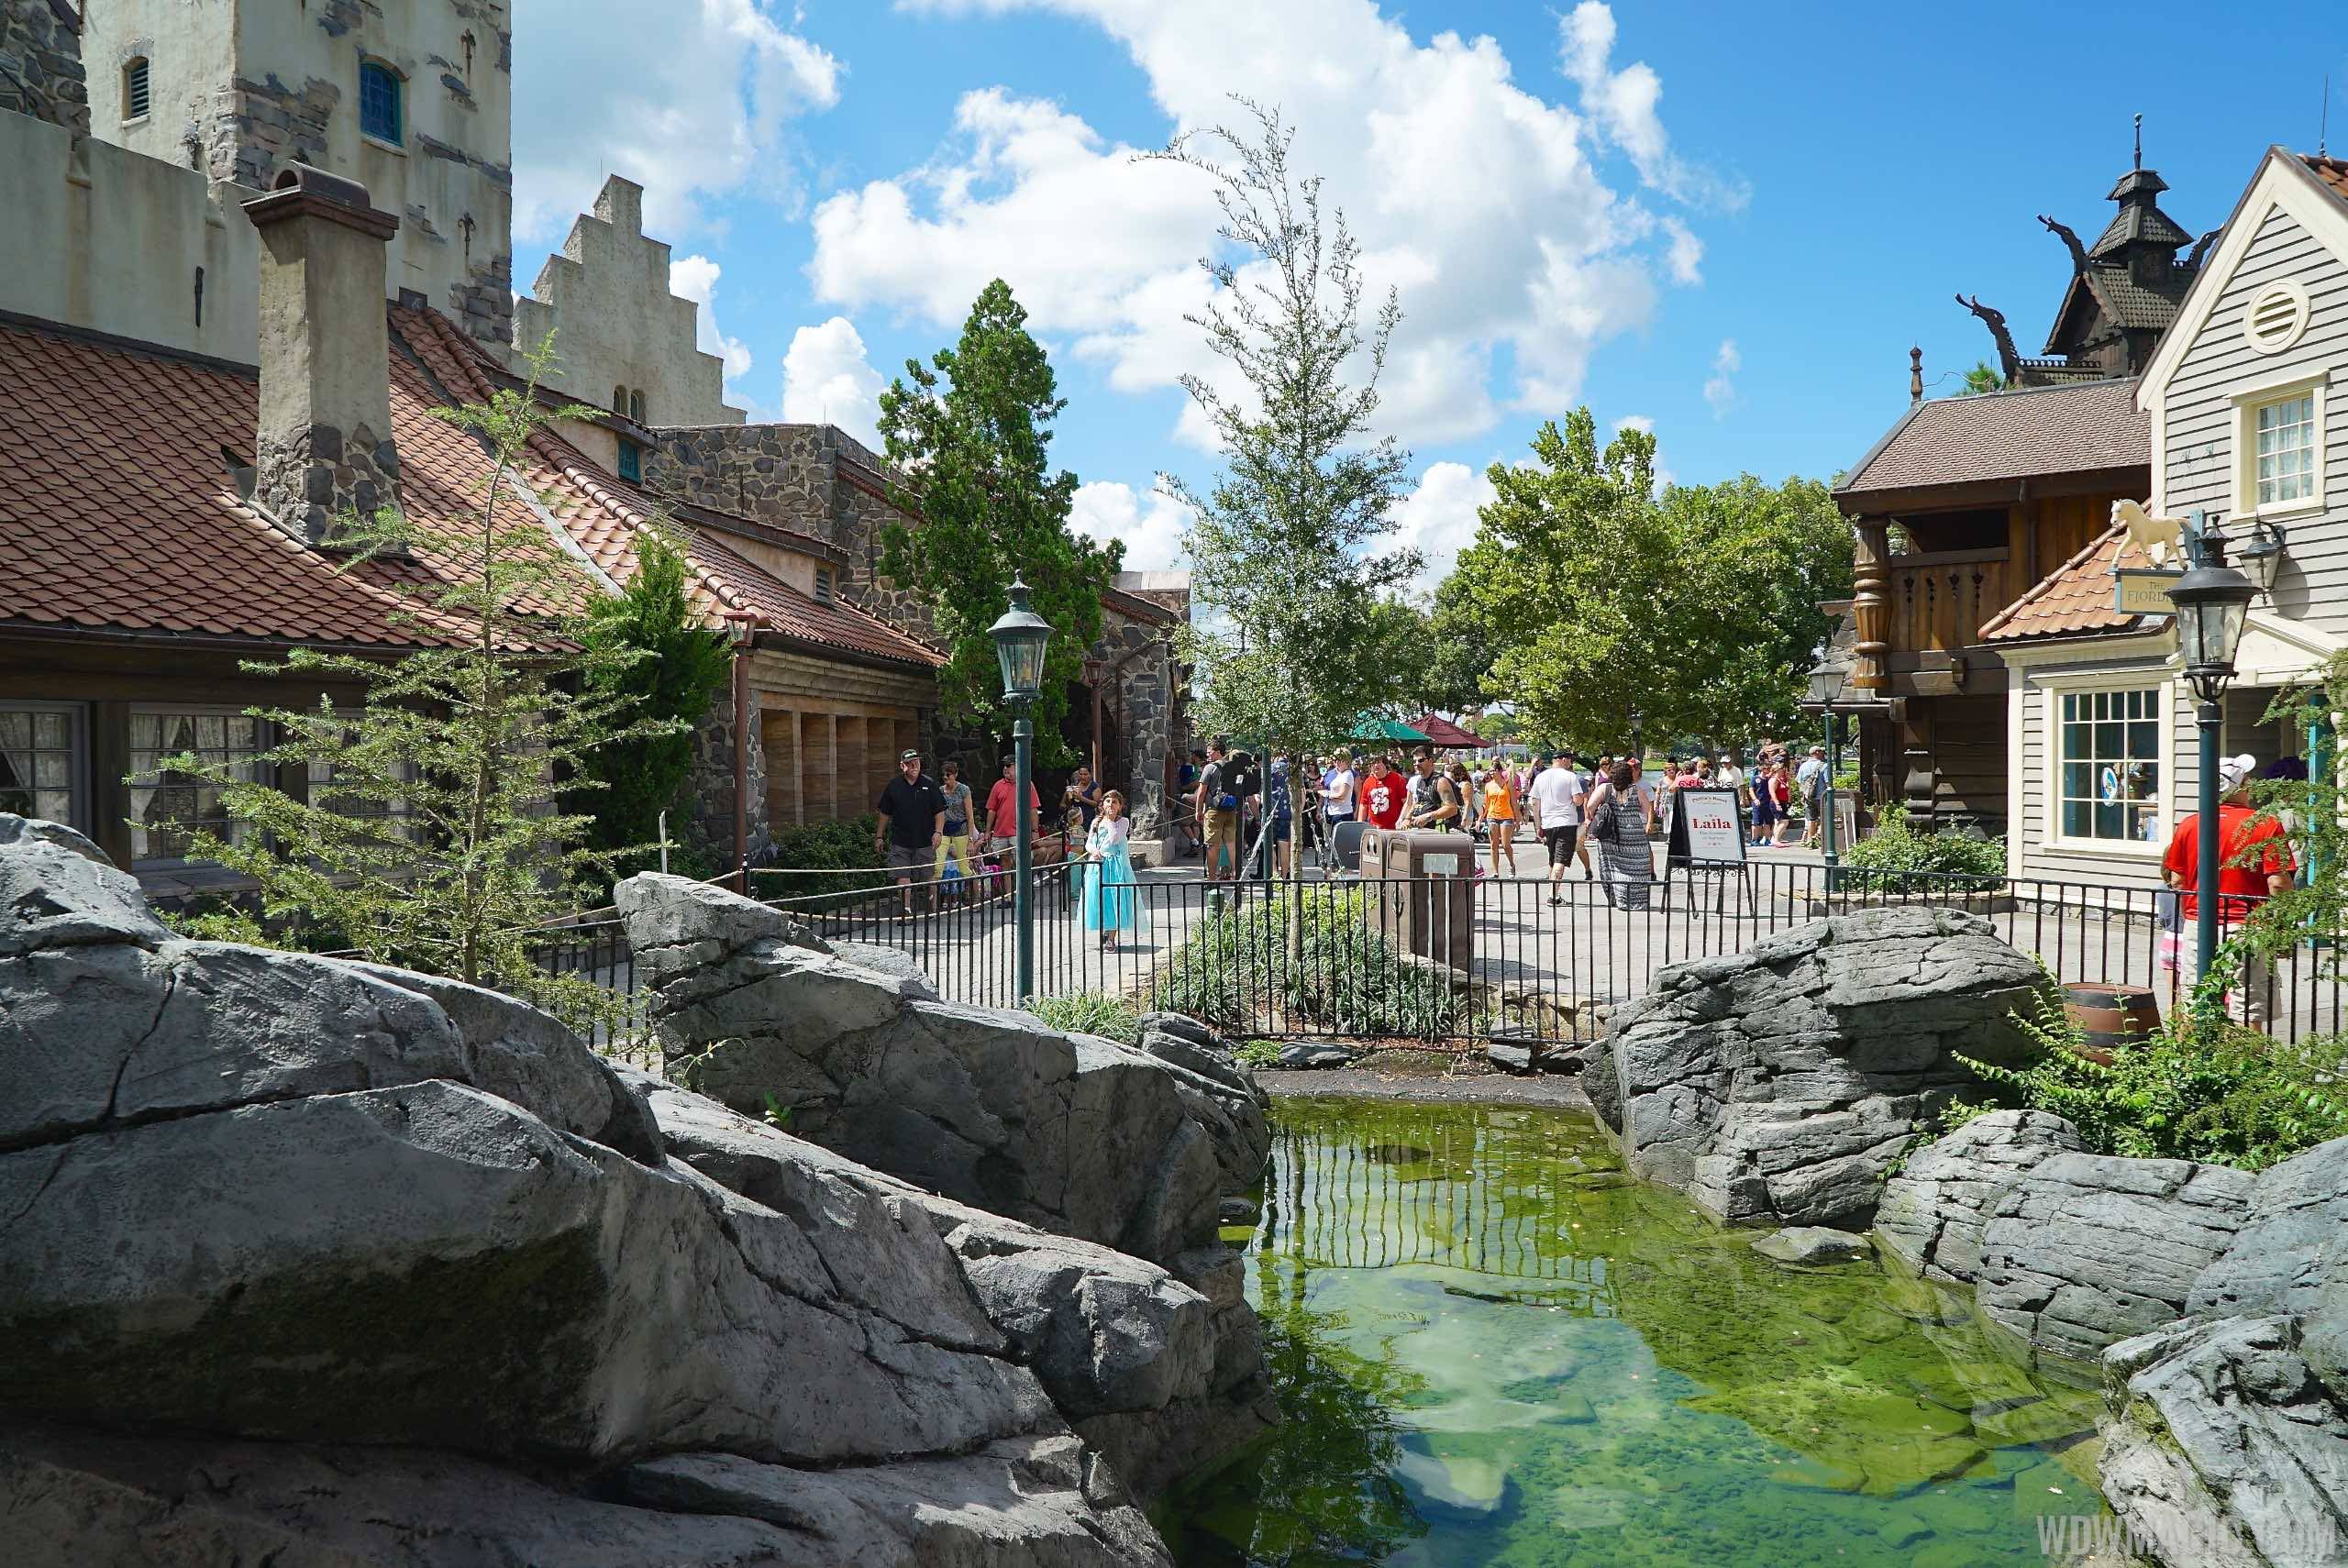 New exhibit coming to Epcot's Norway Pavilion Stave Church Gallery